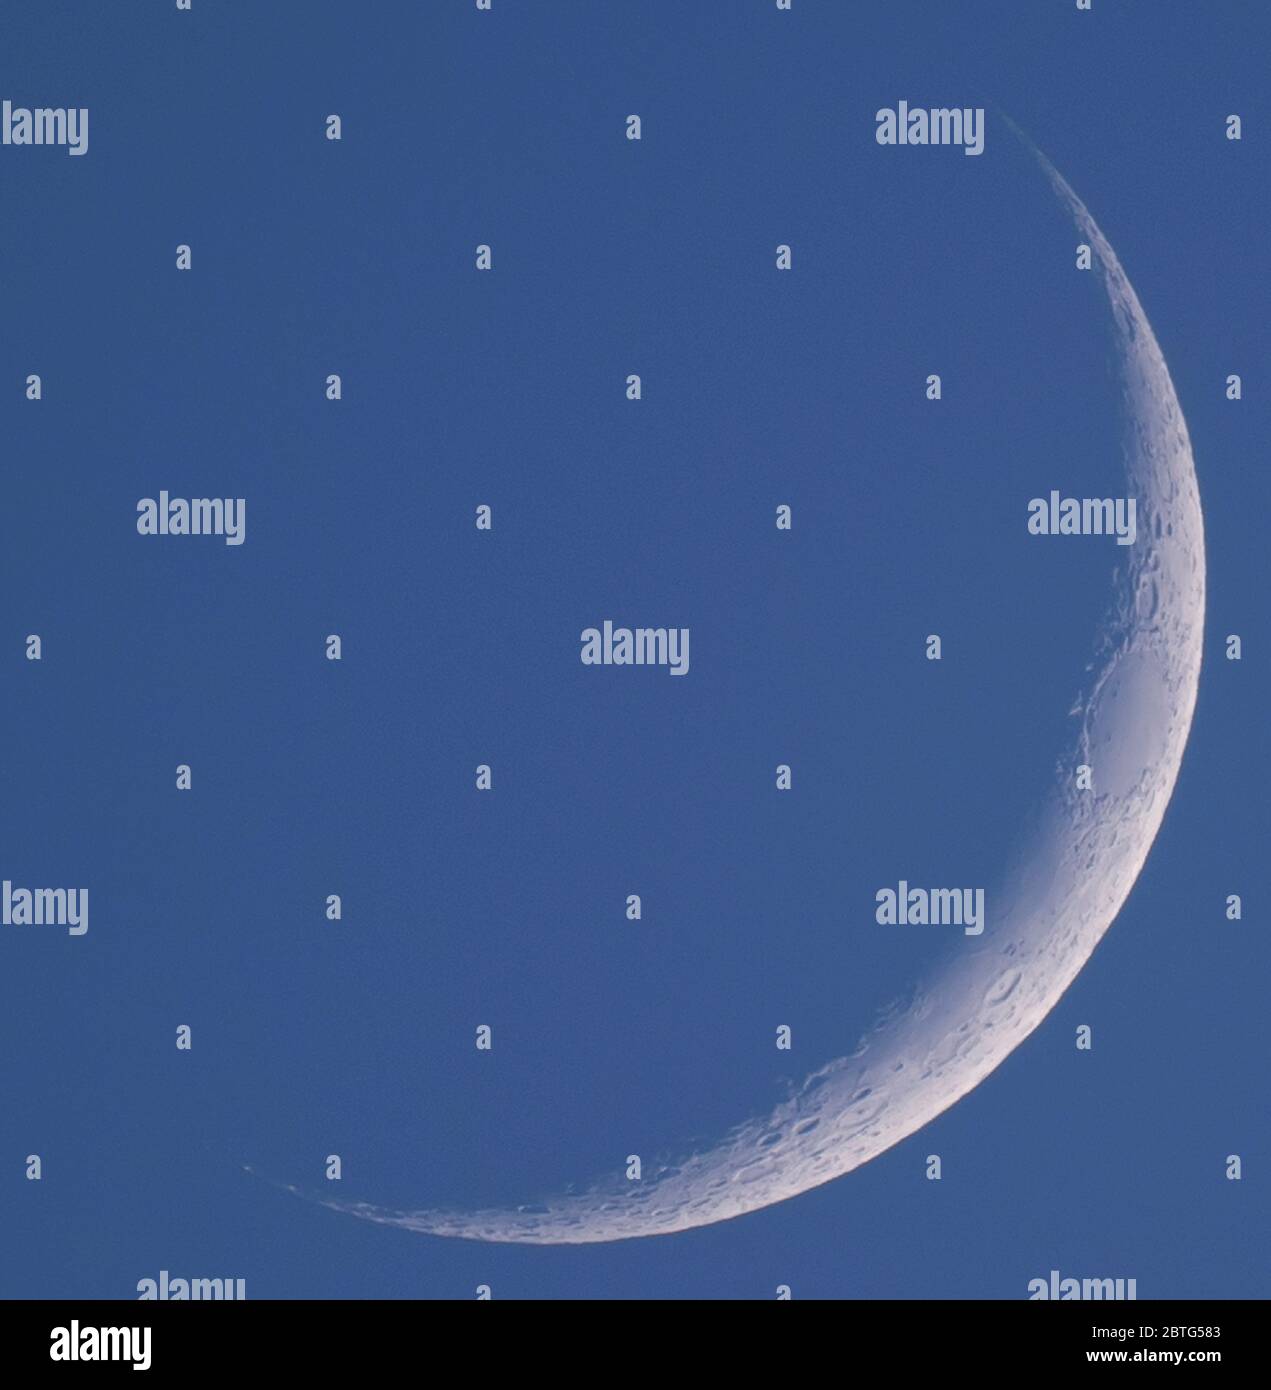 Wimbledon, London, UK. 25 May 2020. A 9.5% fine crescent waxing Moon on a clear and warm evening with the Sea of Crises (Mare Crisium) clearly visible on the right edge. Credit: Malcolm Park/Alamy Live News. Stock Photo